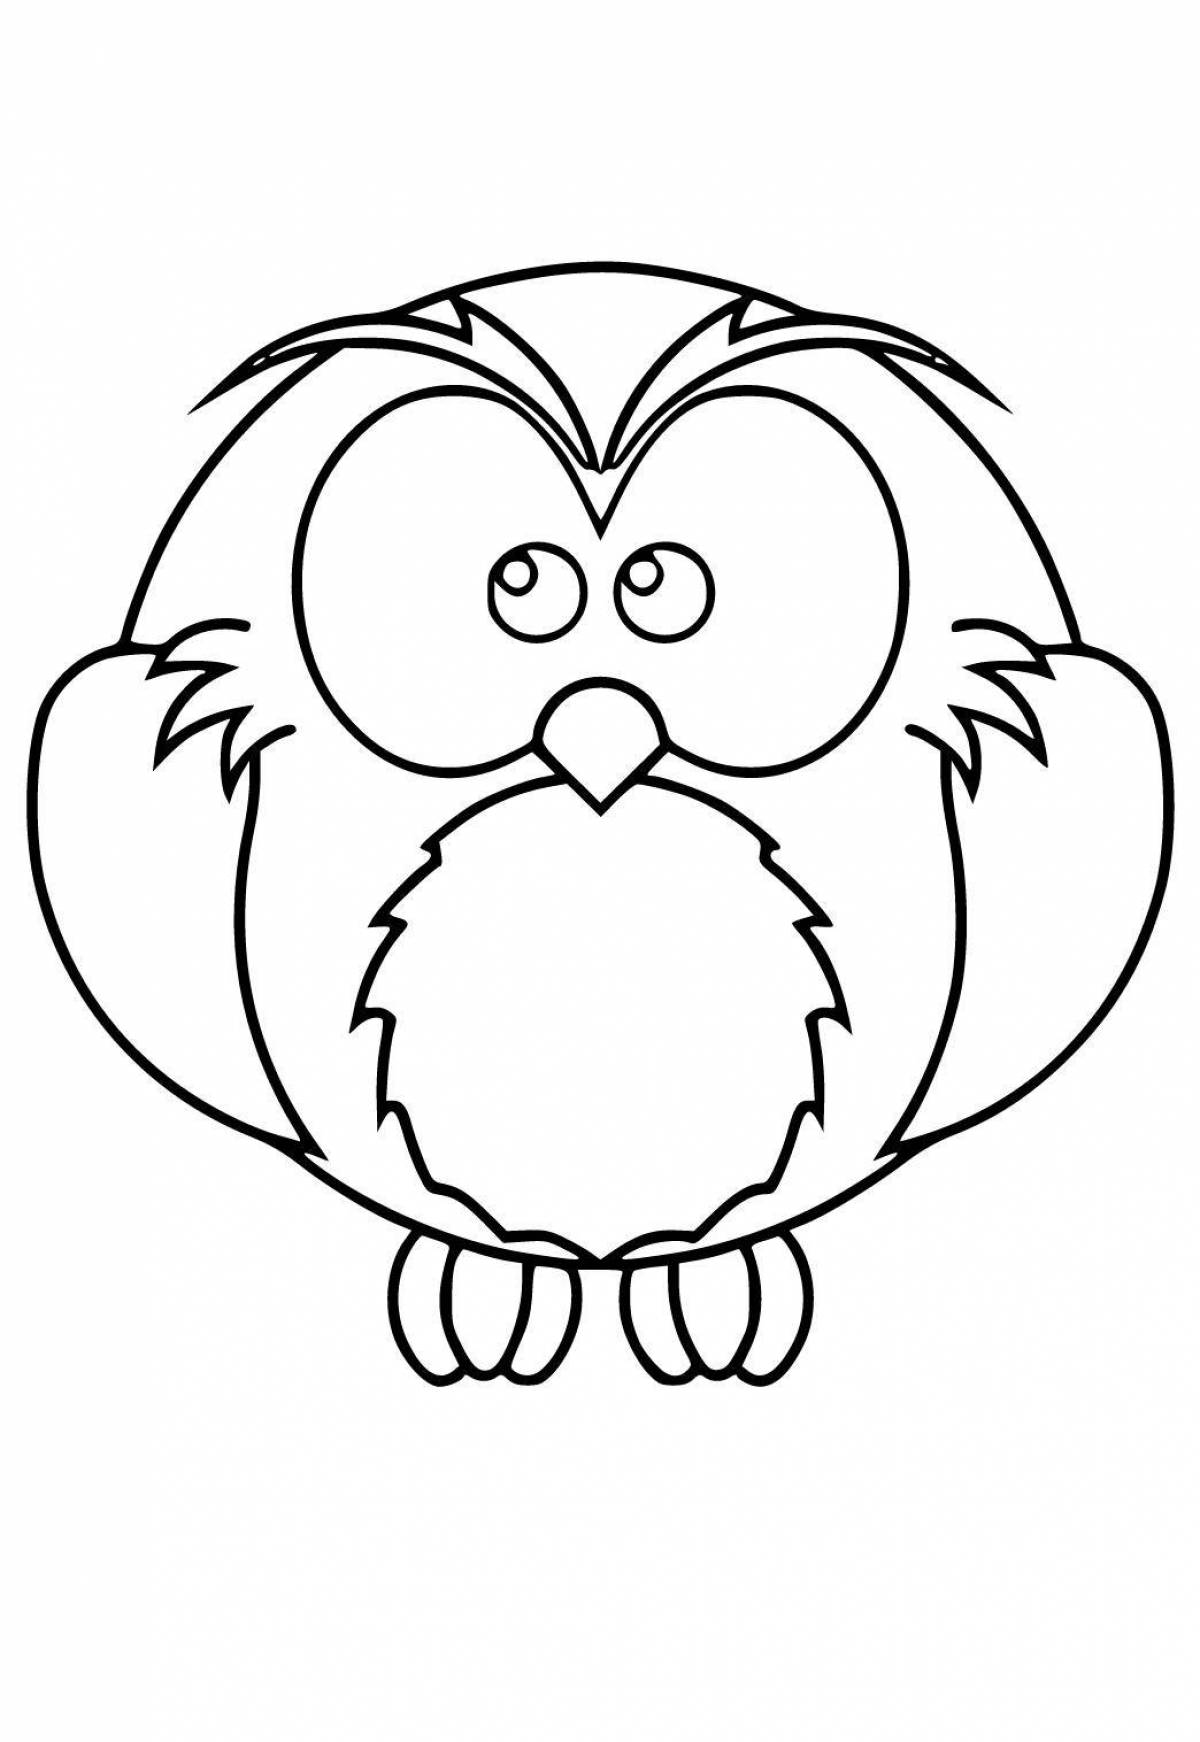 Sparkling owl in the hollow for children 2-3 years old